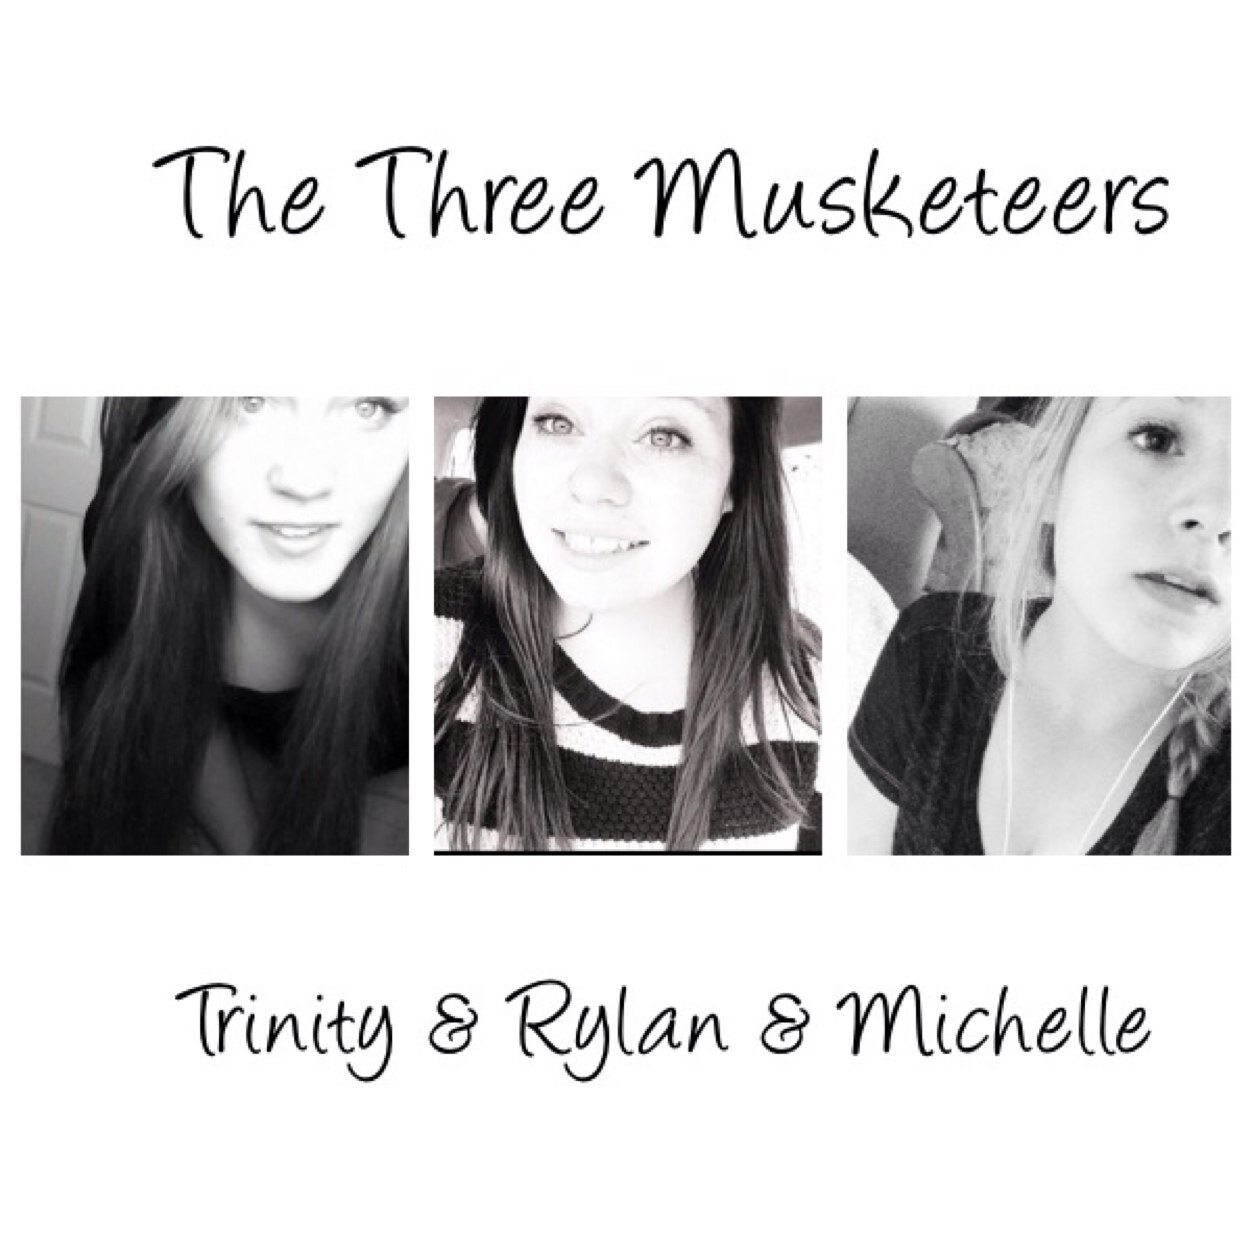 Heyy! We are TheThreeMusketeers! We are brand new youtubers, so go subsribce!!